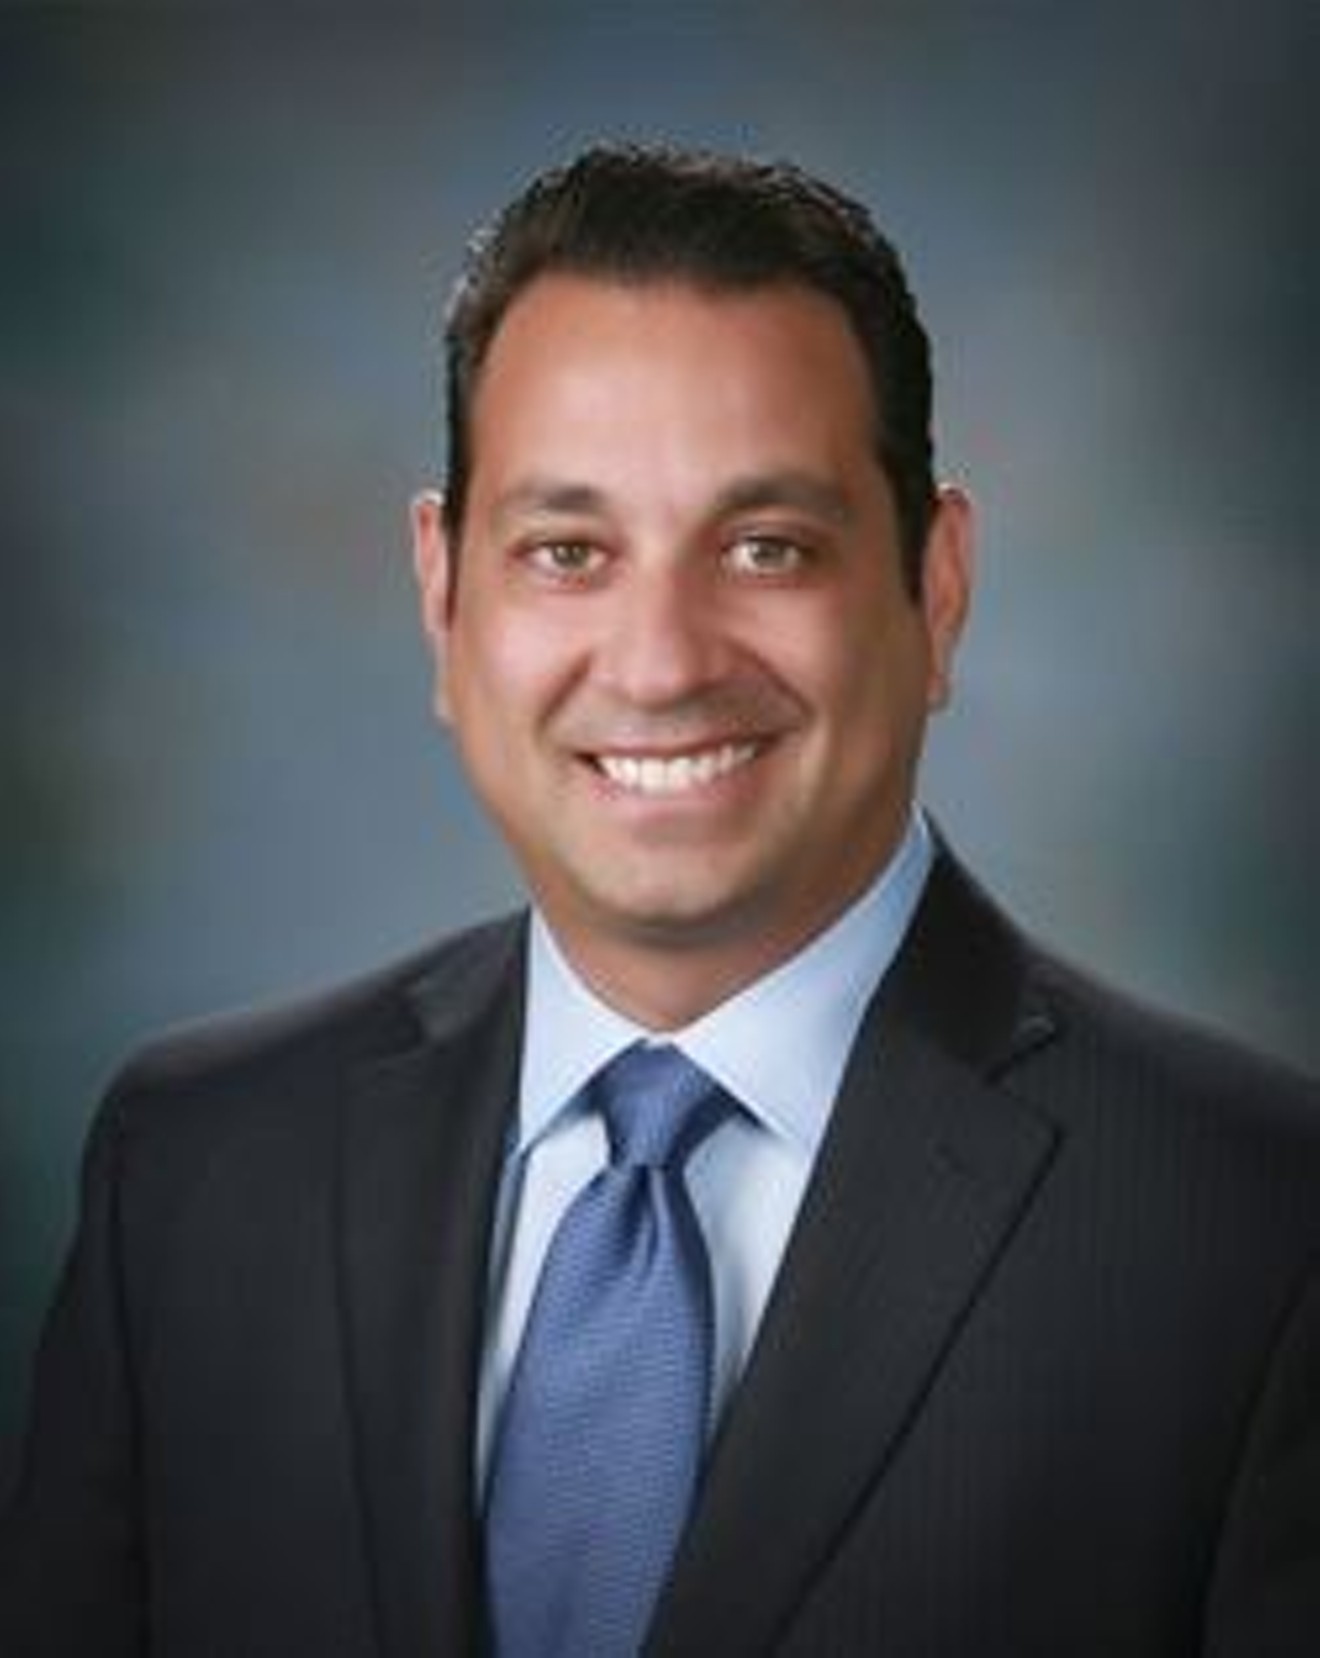 Steve Chucri, chair of the Maricopa County Board of Supervisors and president and CEO of the Arizona Restaurant Association.